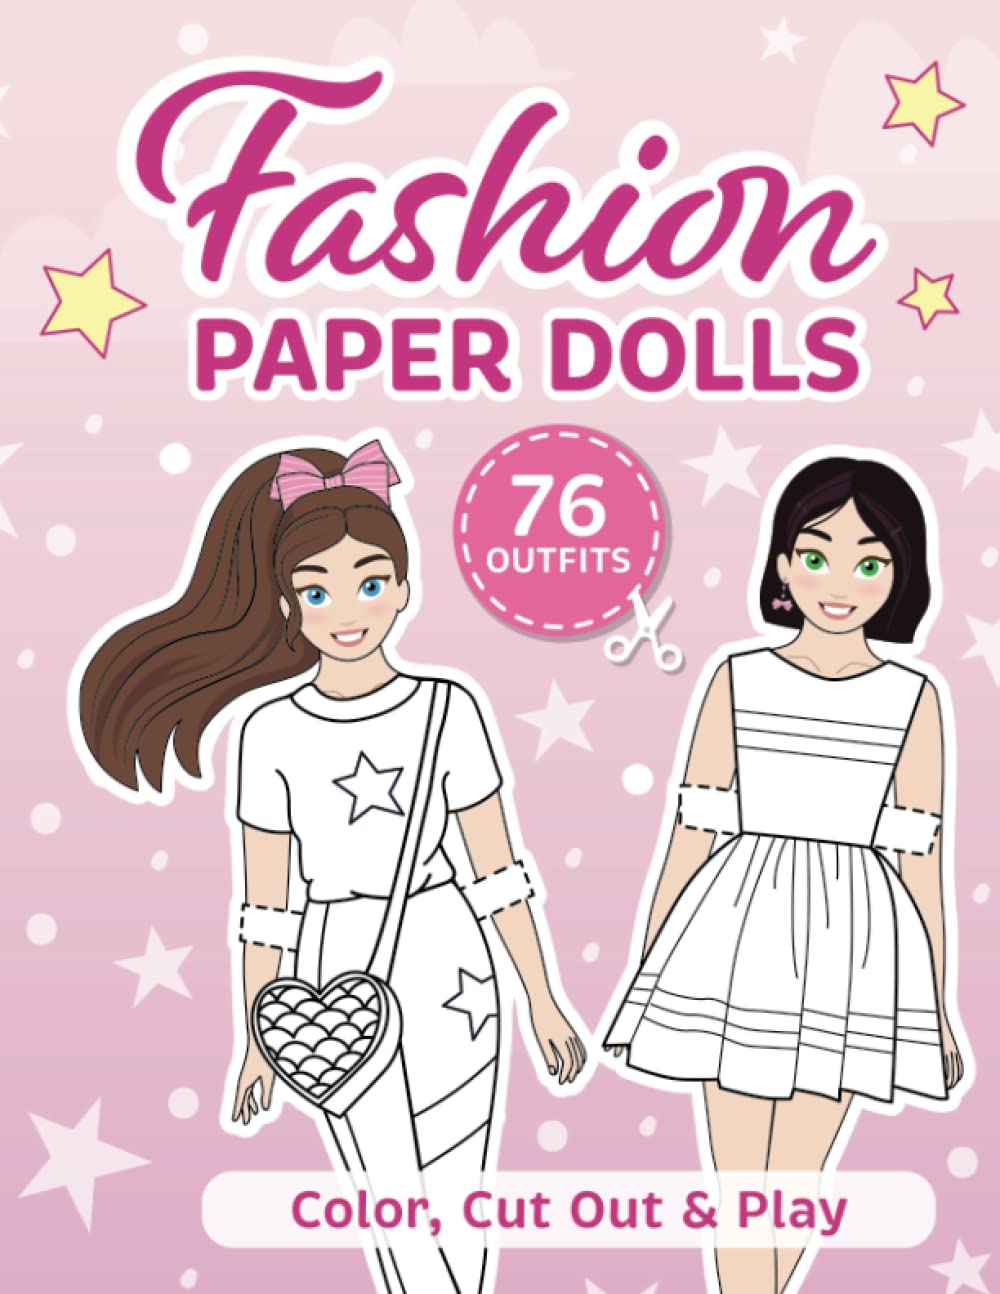 Cut Out Paper Dolls: Coloring book: 76 Outfits (Fashion Paper Dolls)